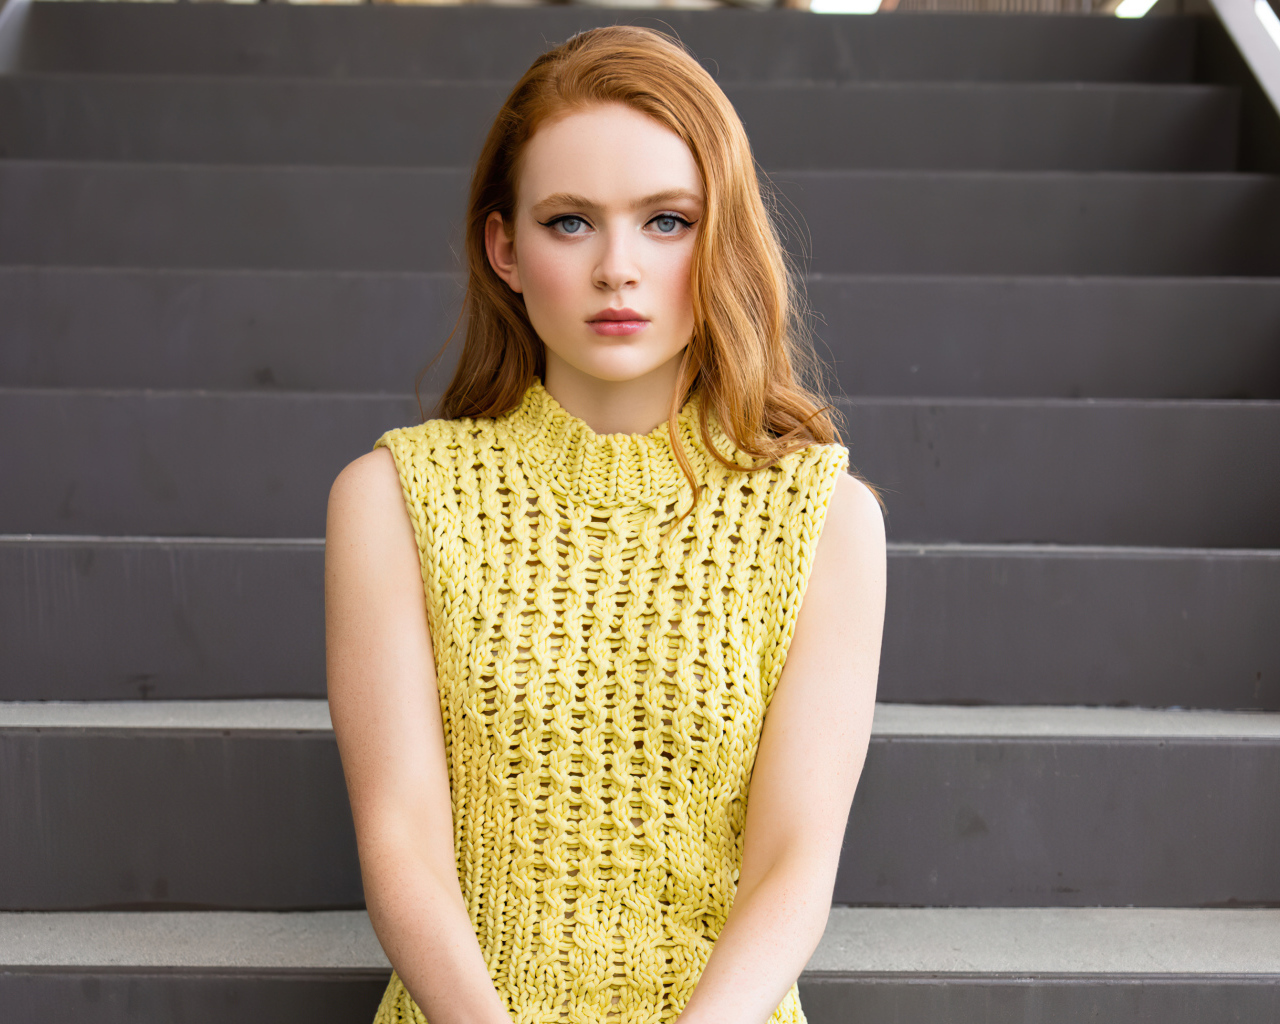 Red-haired girl actress Sadie Sink on the steps